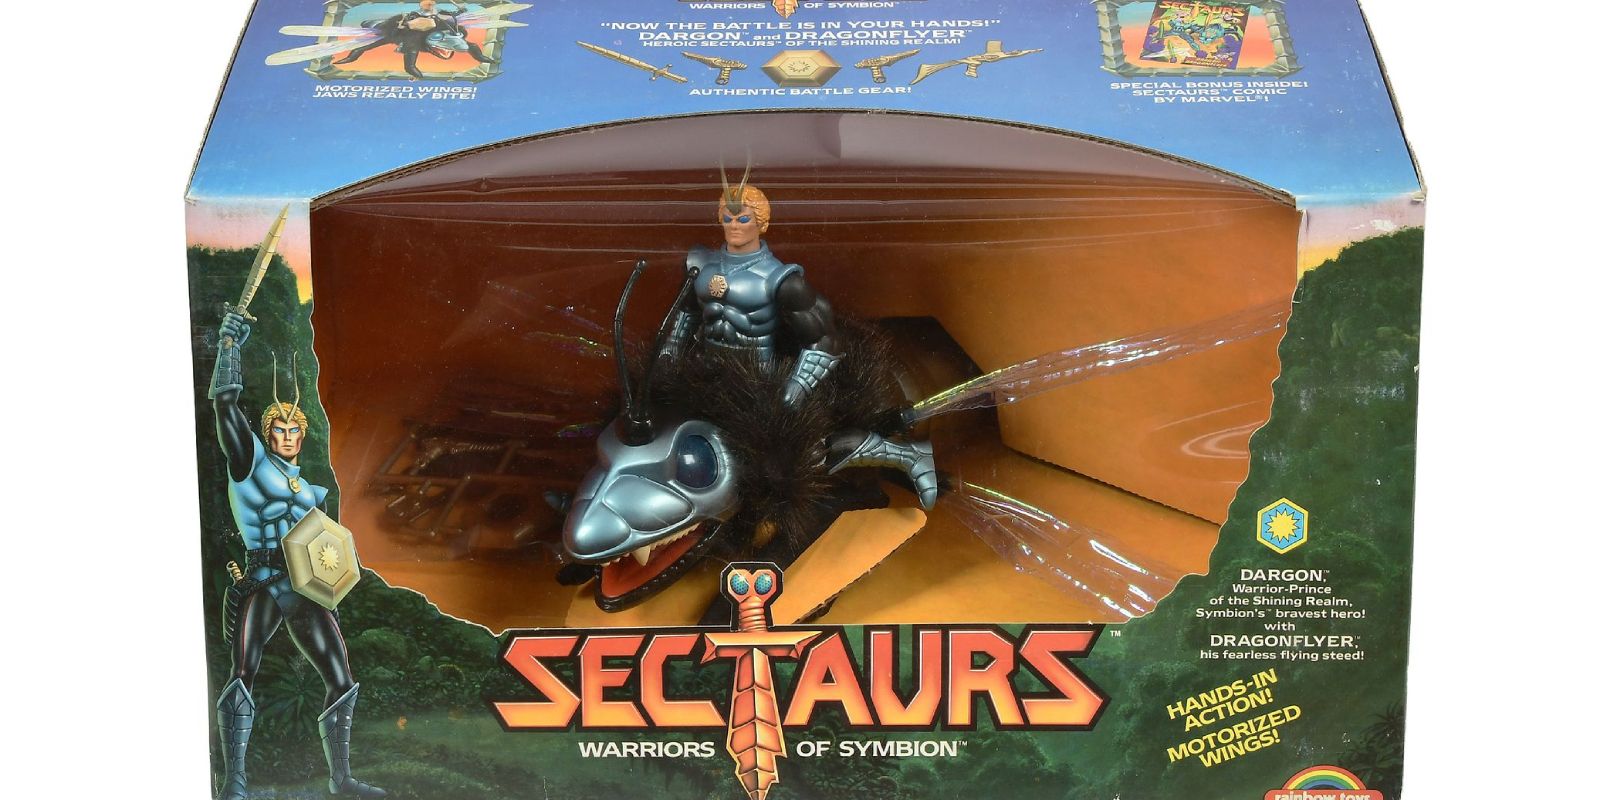 An unopened box containing a Dargon toy from Sectaurs